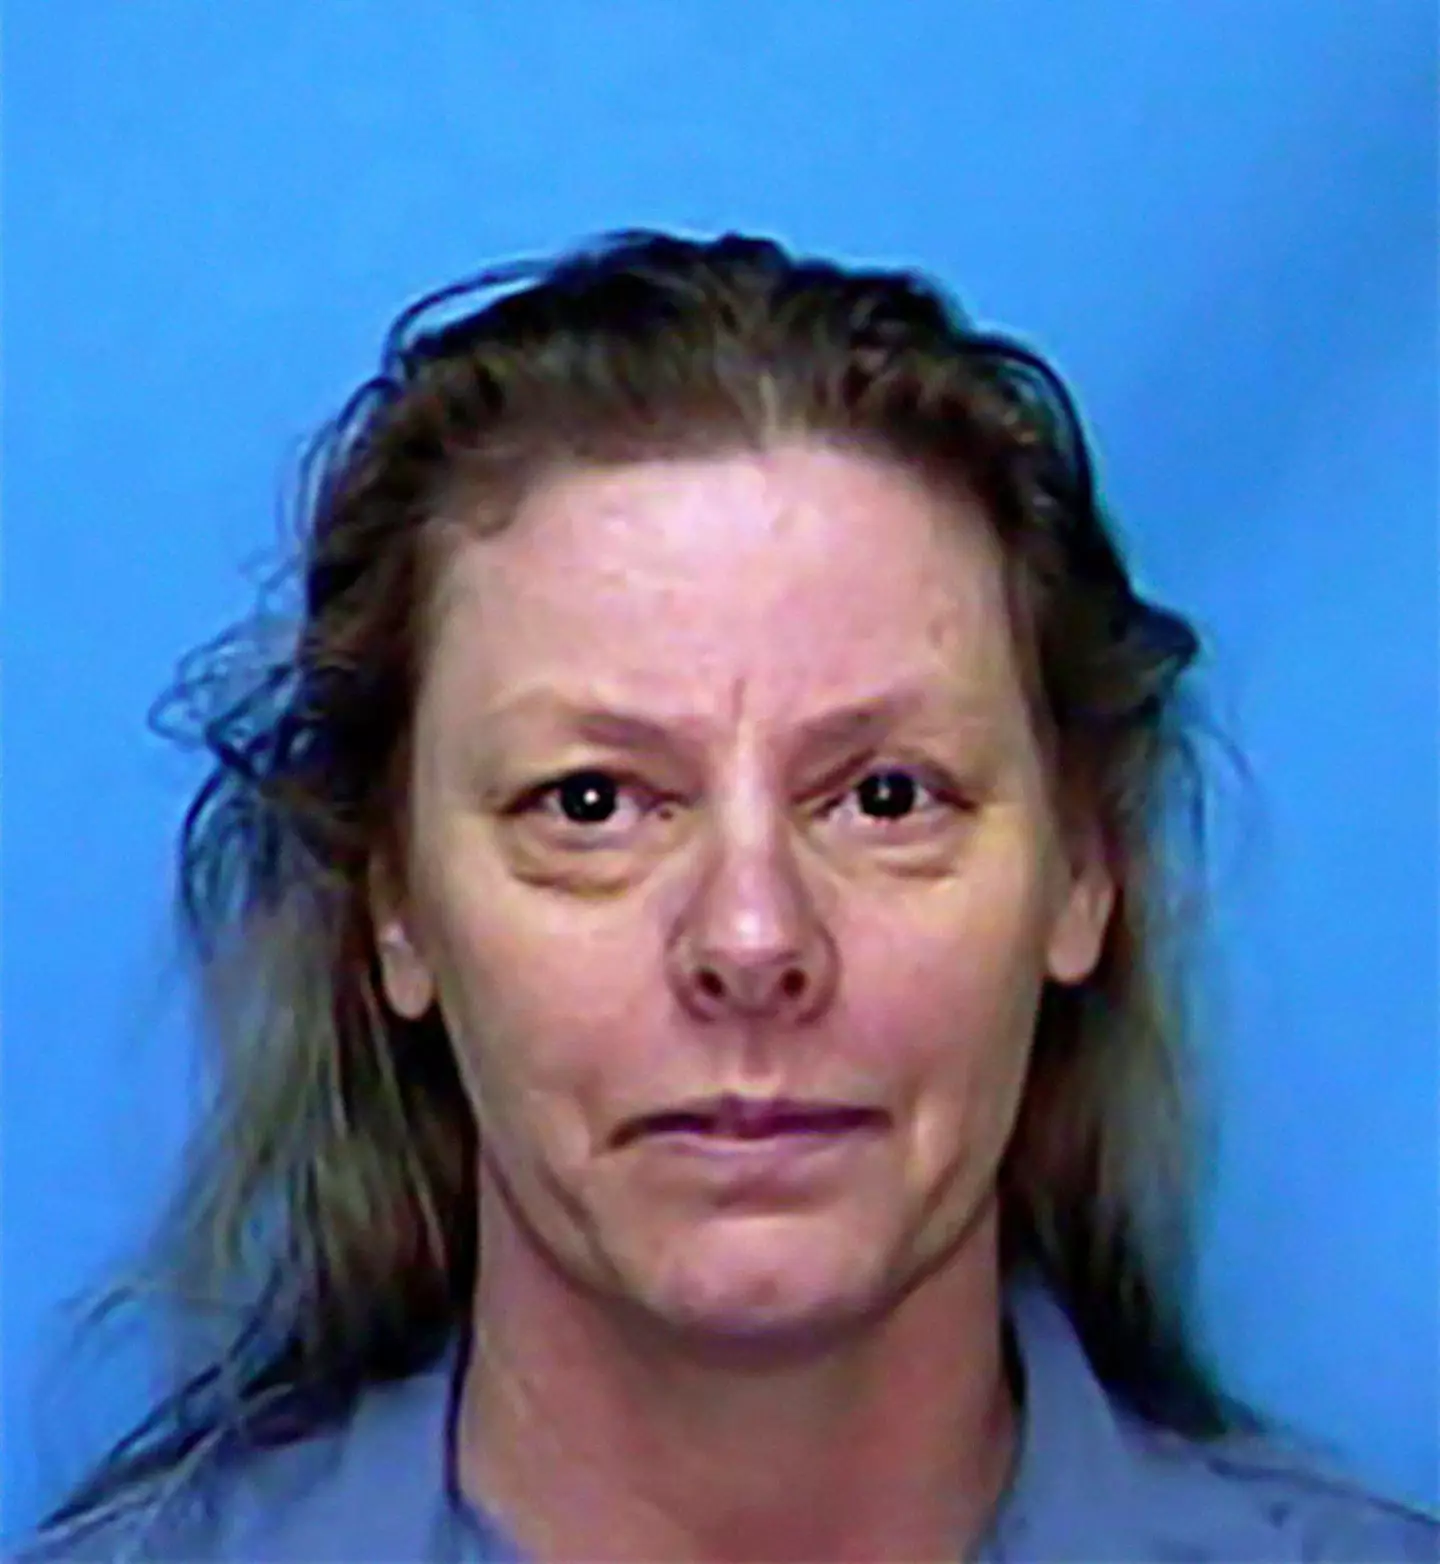 Aileen Wuornos was sentenced to death for the murders of six men.